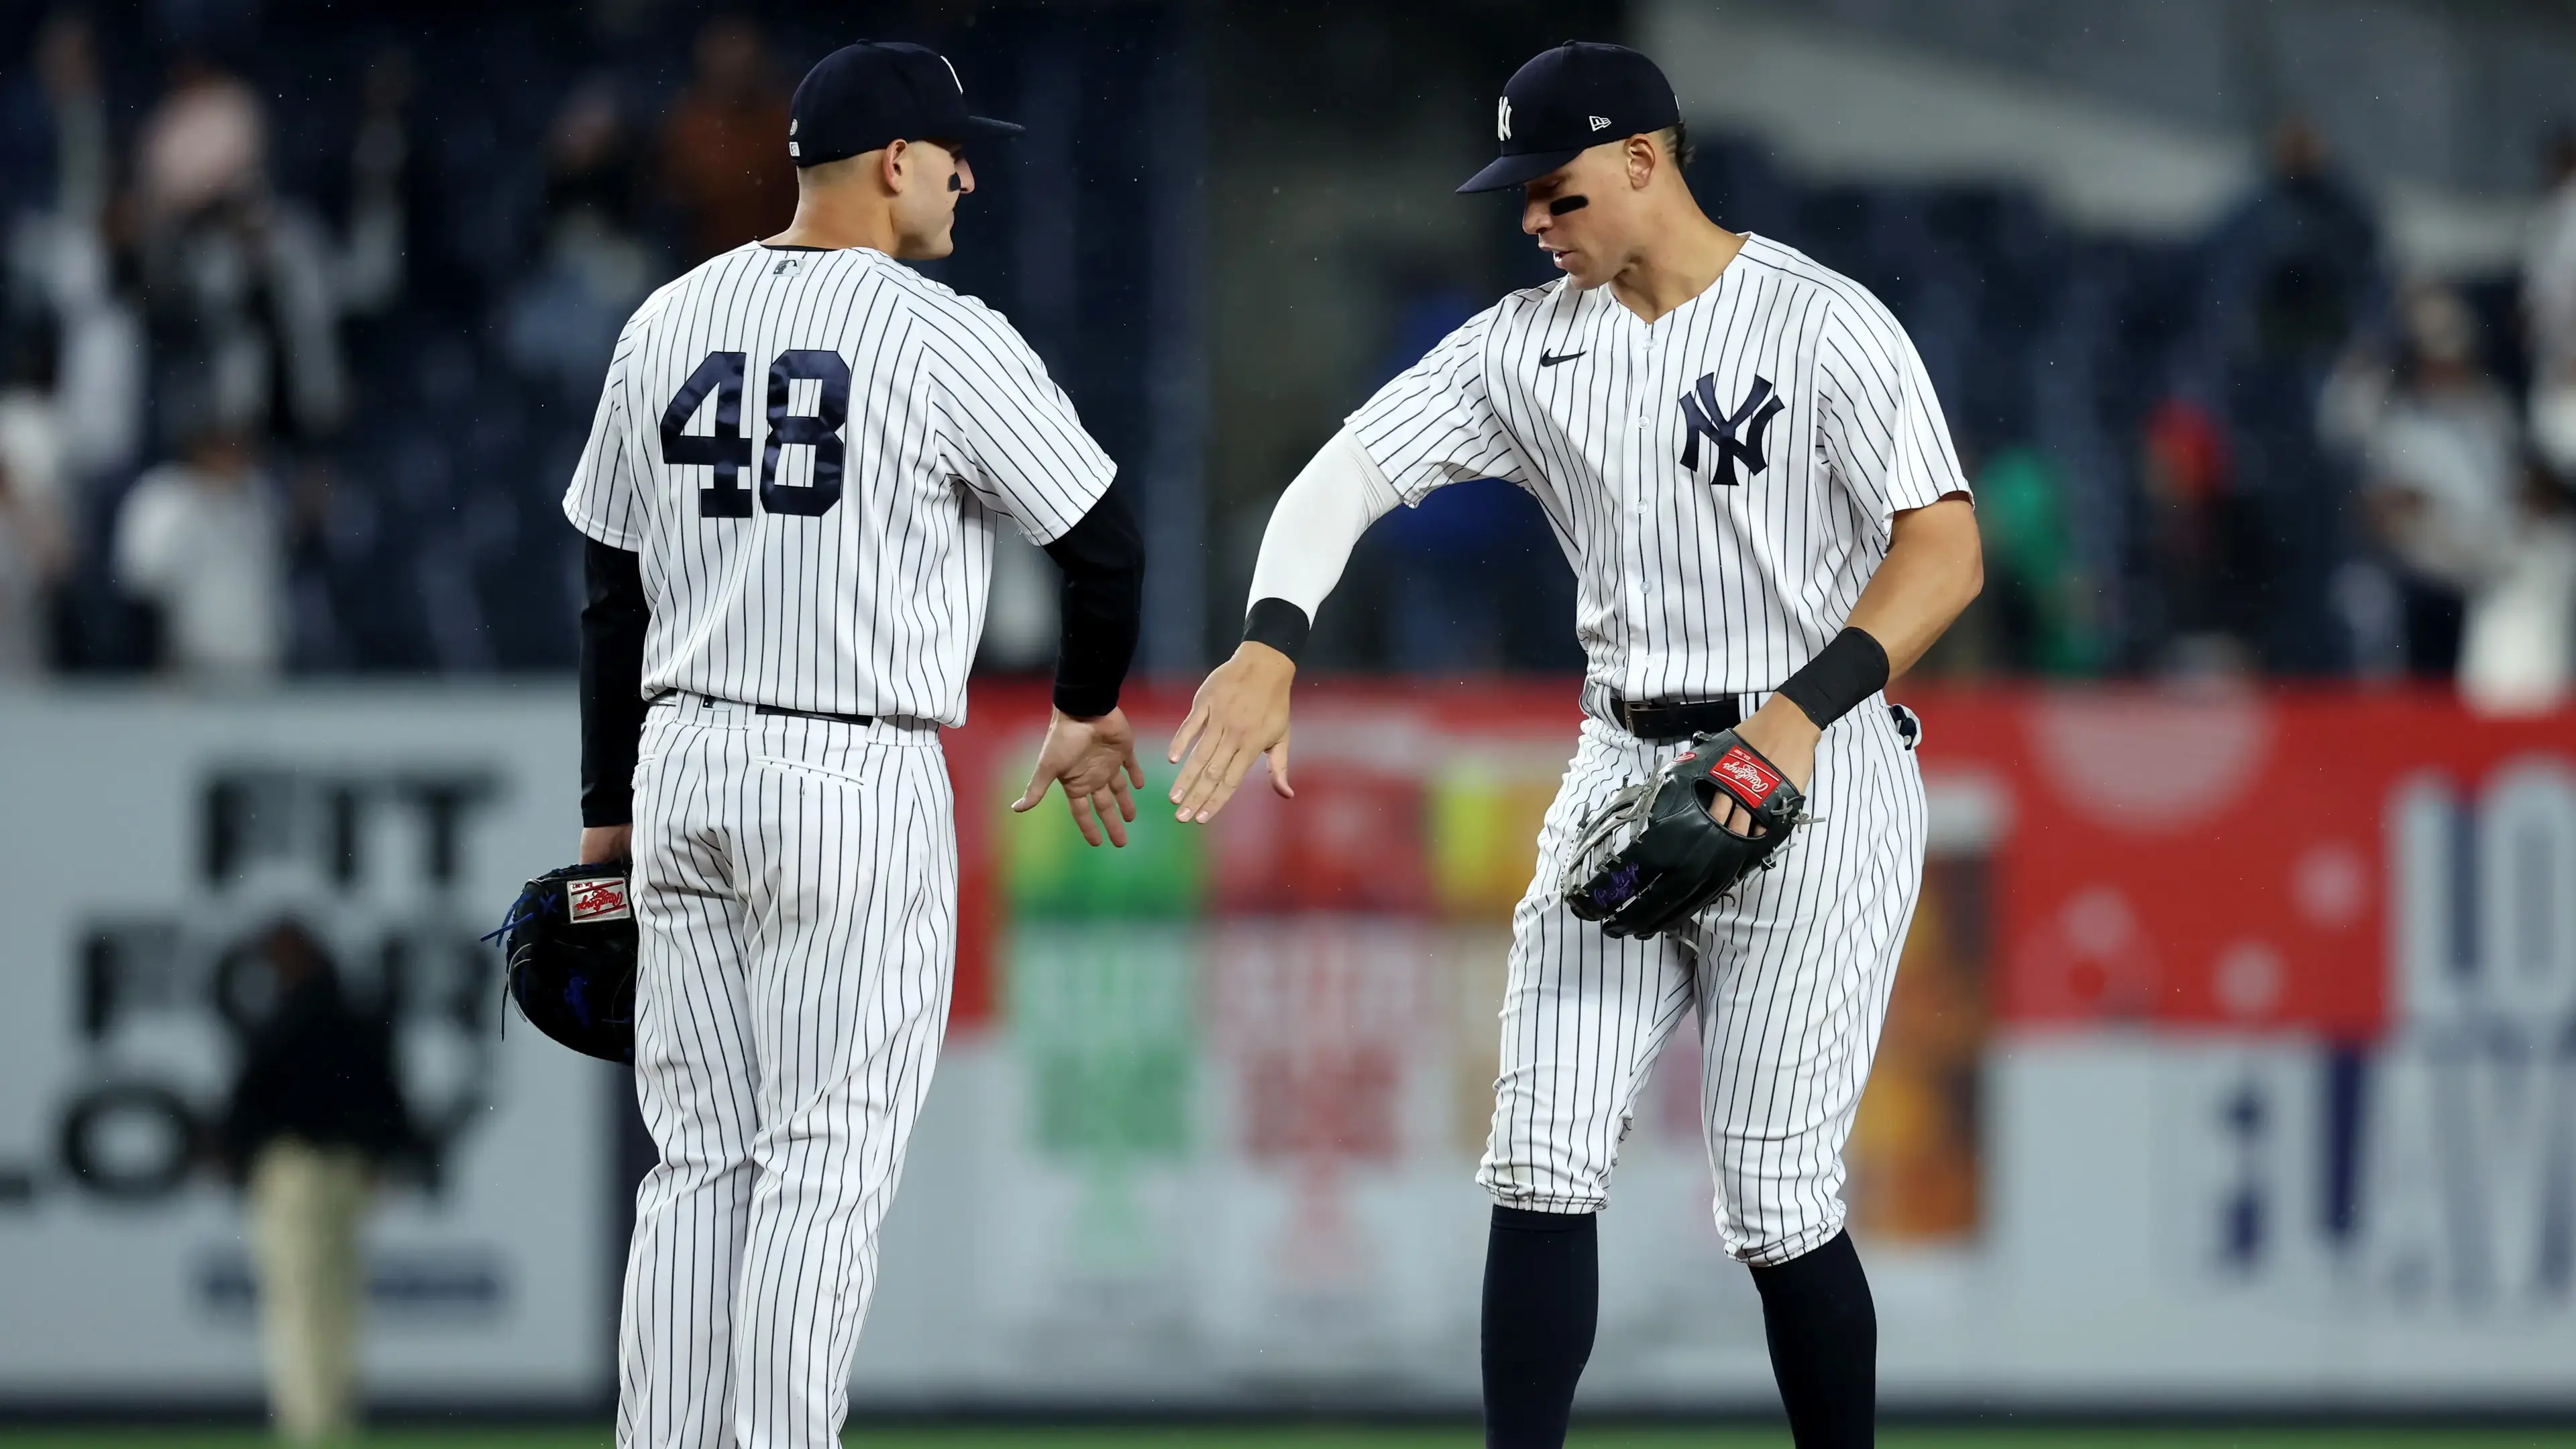 New York Yankees first baseman Anthony Rizzo (48) and center fielder Aaron Judge (99) celebrate after defeating the Baltimore Orioles at Yankee Stadium. / Brad Penner-USA TODAY Sports